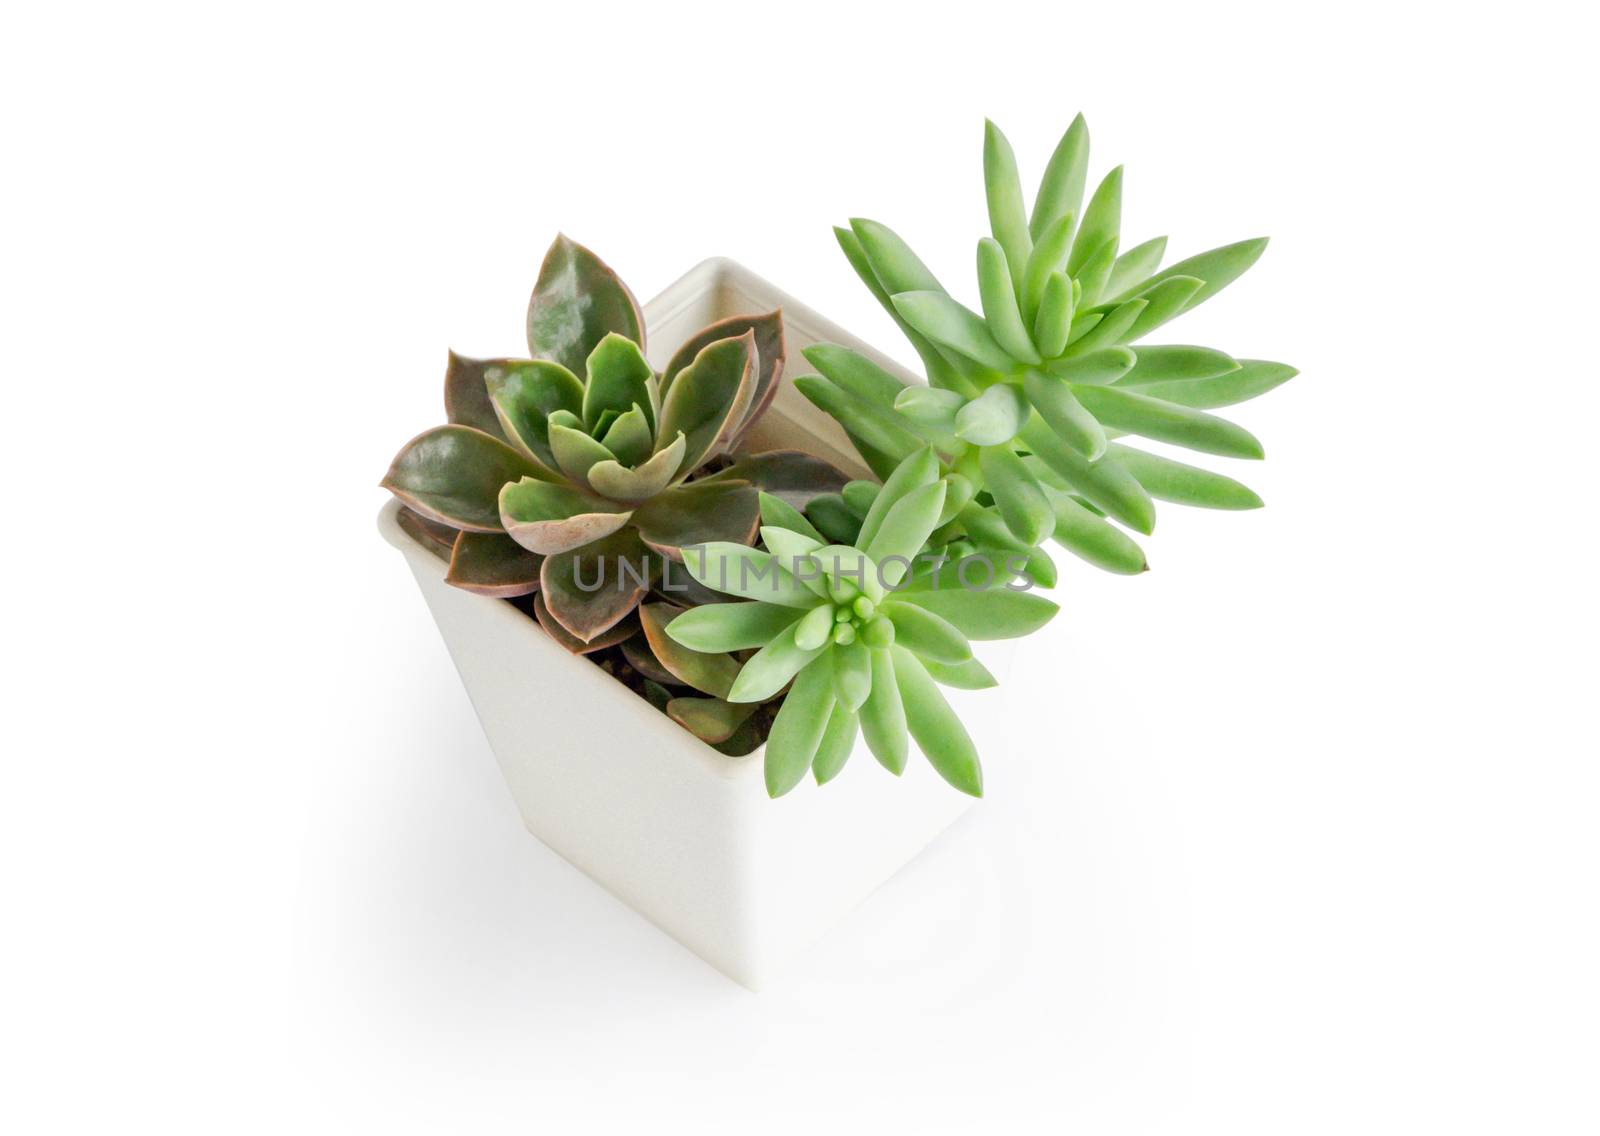 Green succulent cactus in pot isolated on white background, deco by pt.pongsak@gmail.com